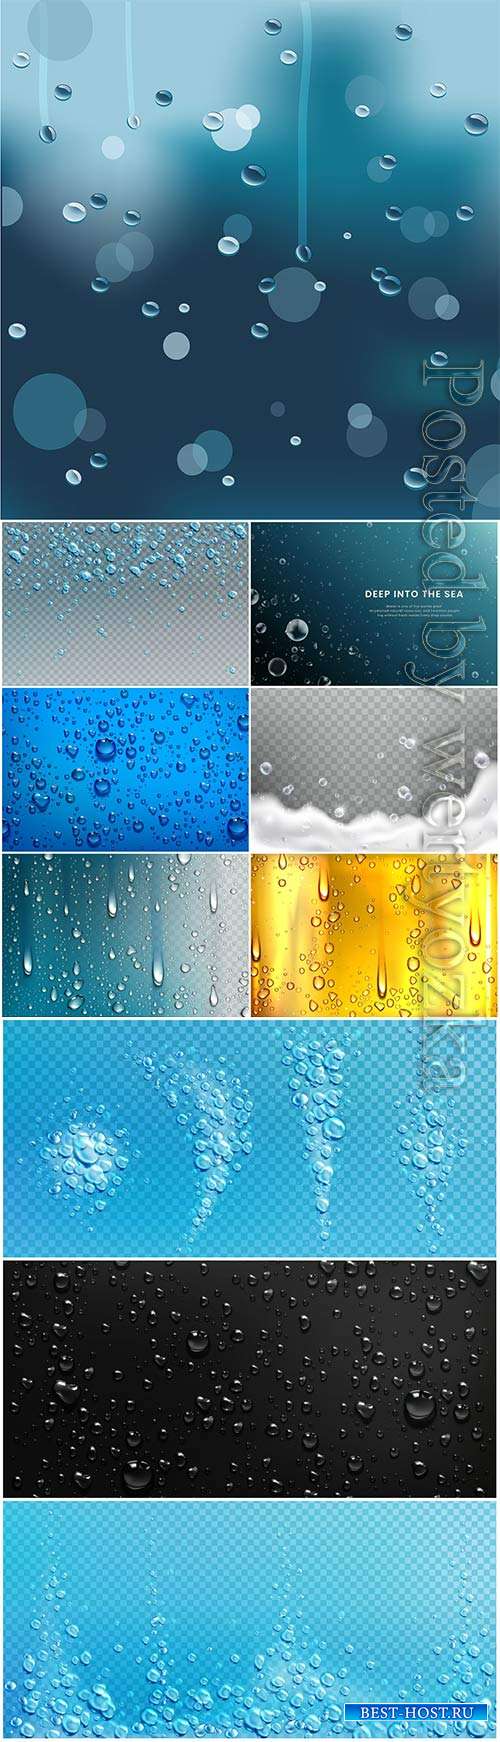 Water droplets vector background